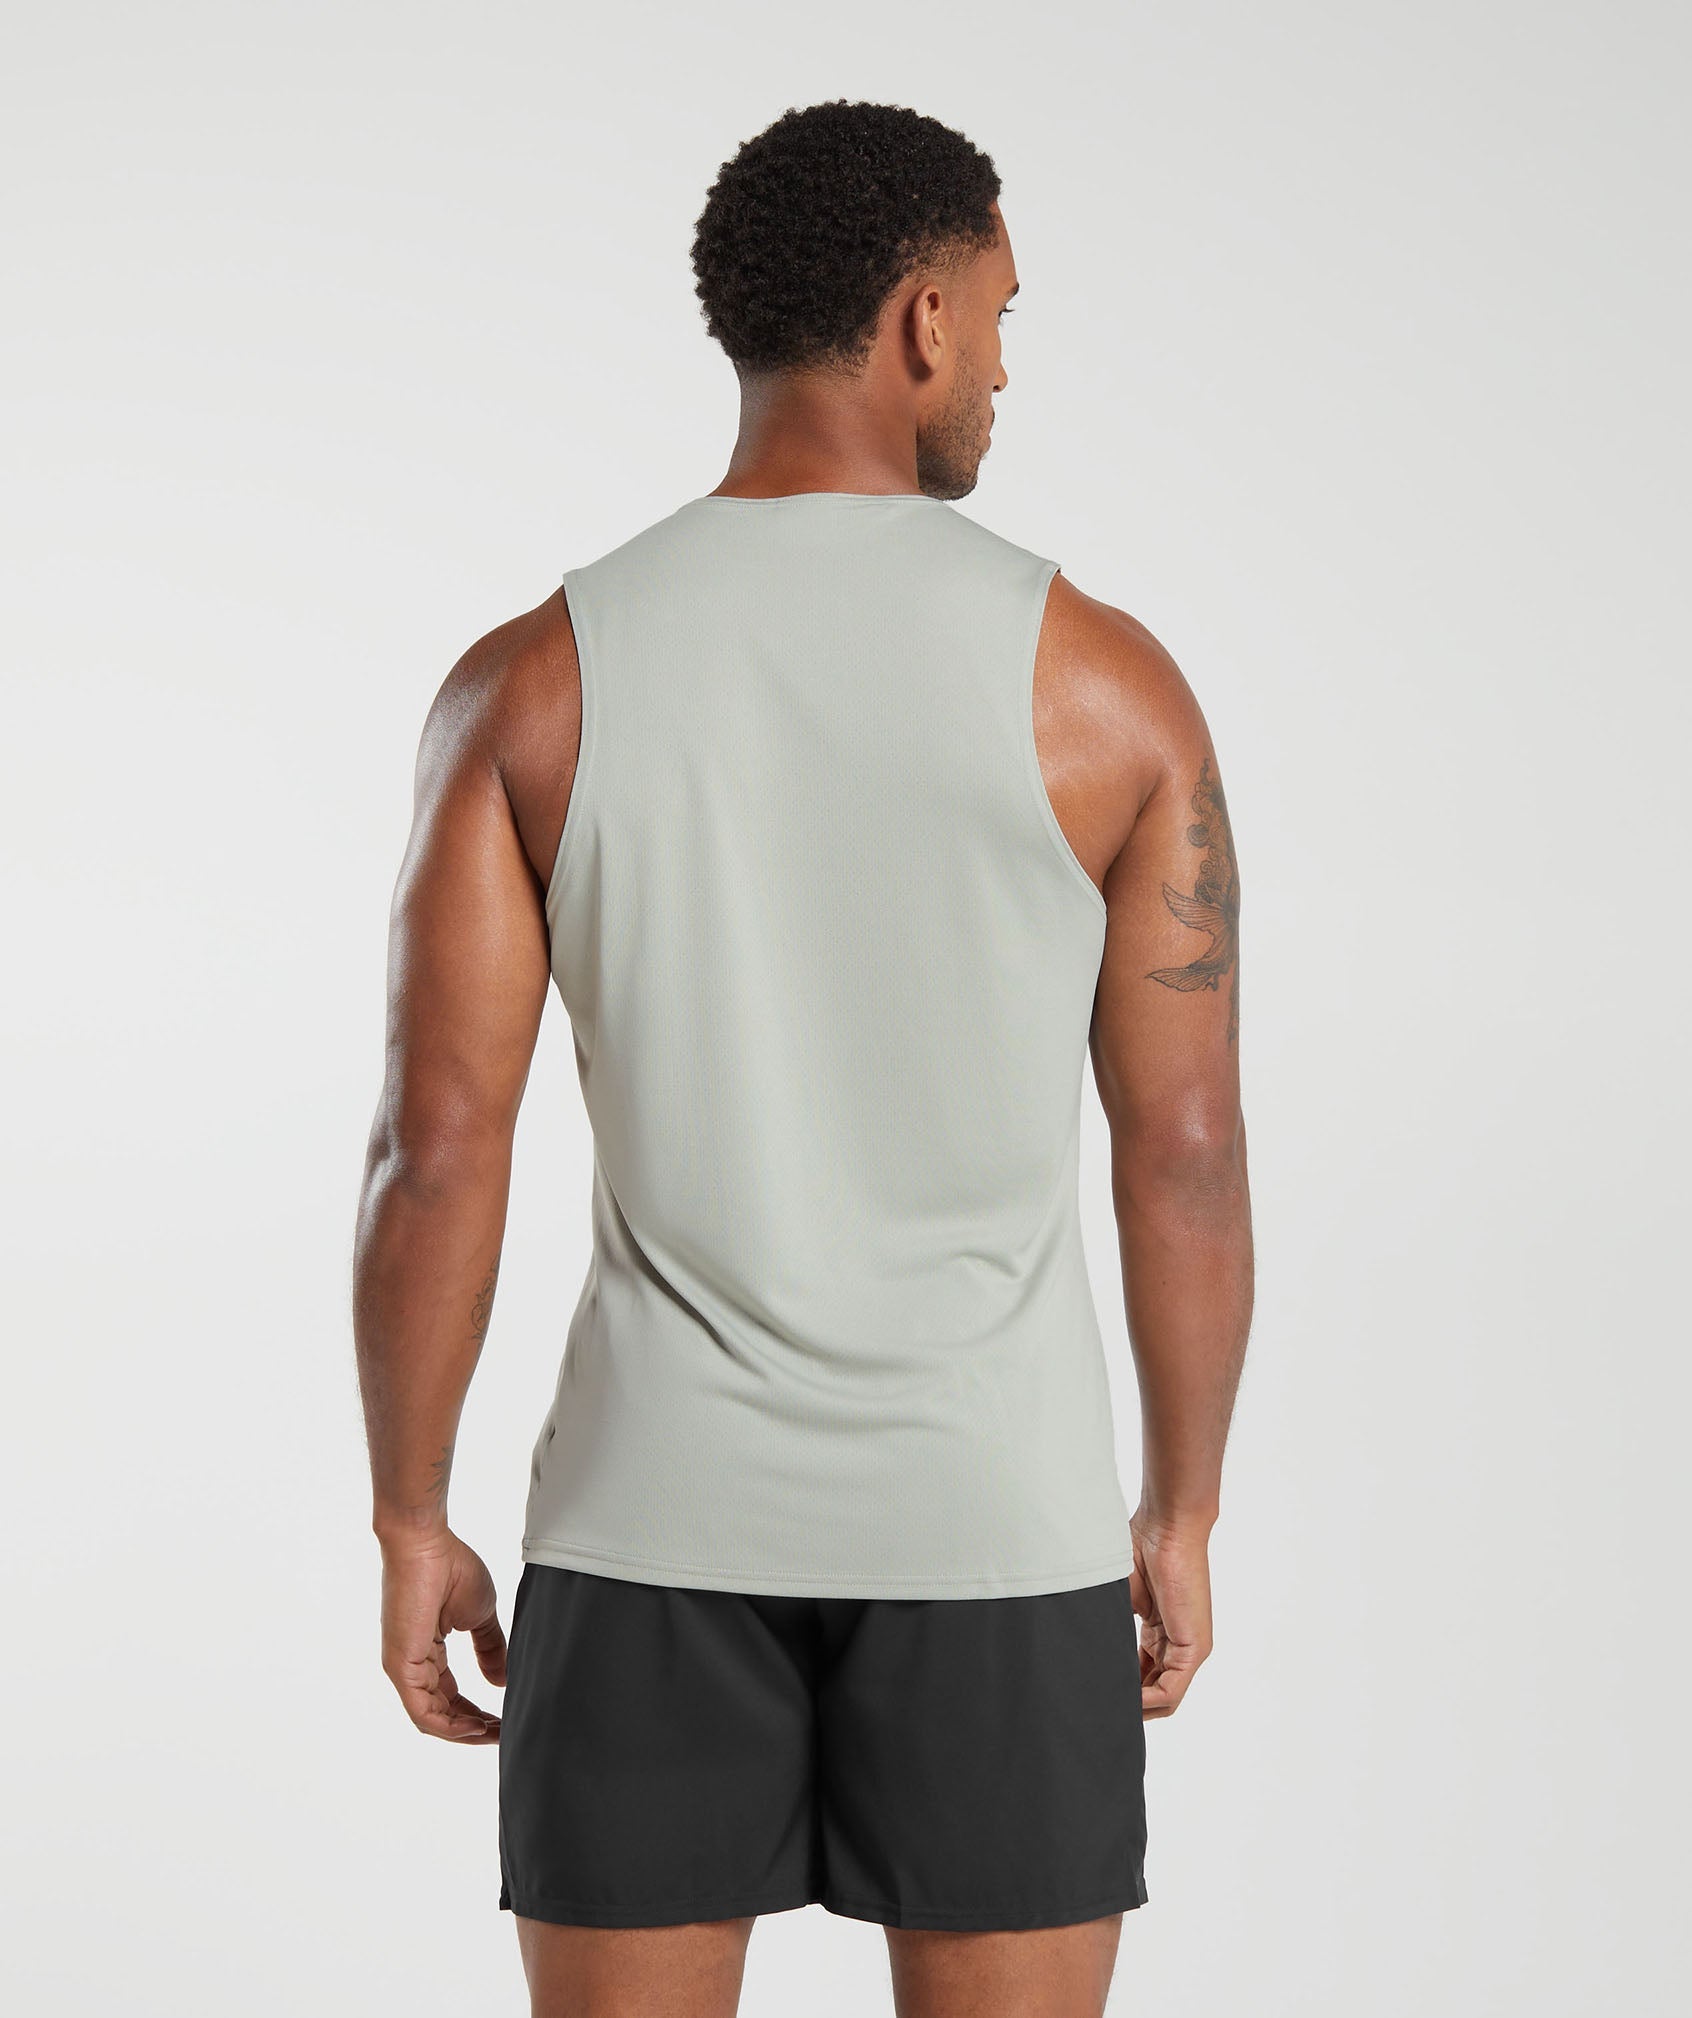 Arrival Tank in Stone Grey - view 2